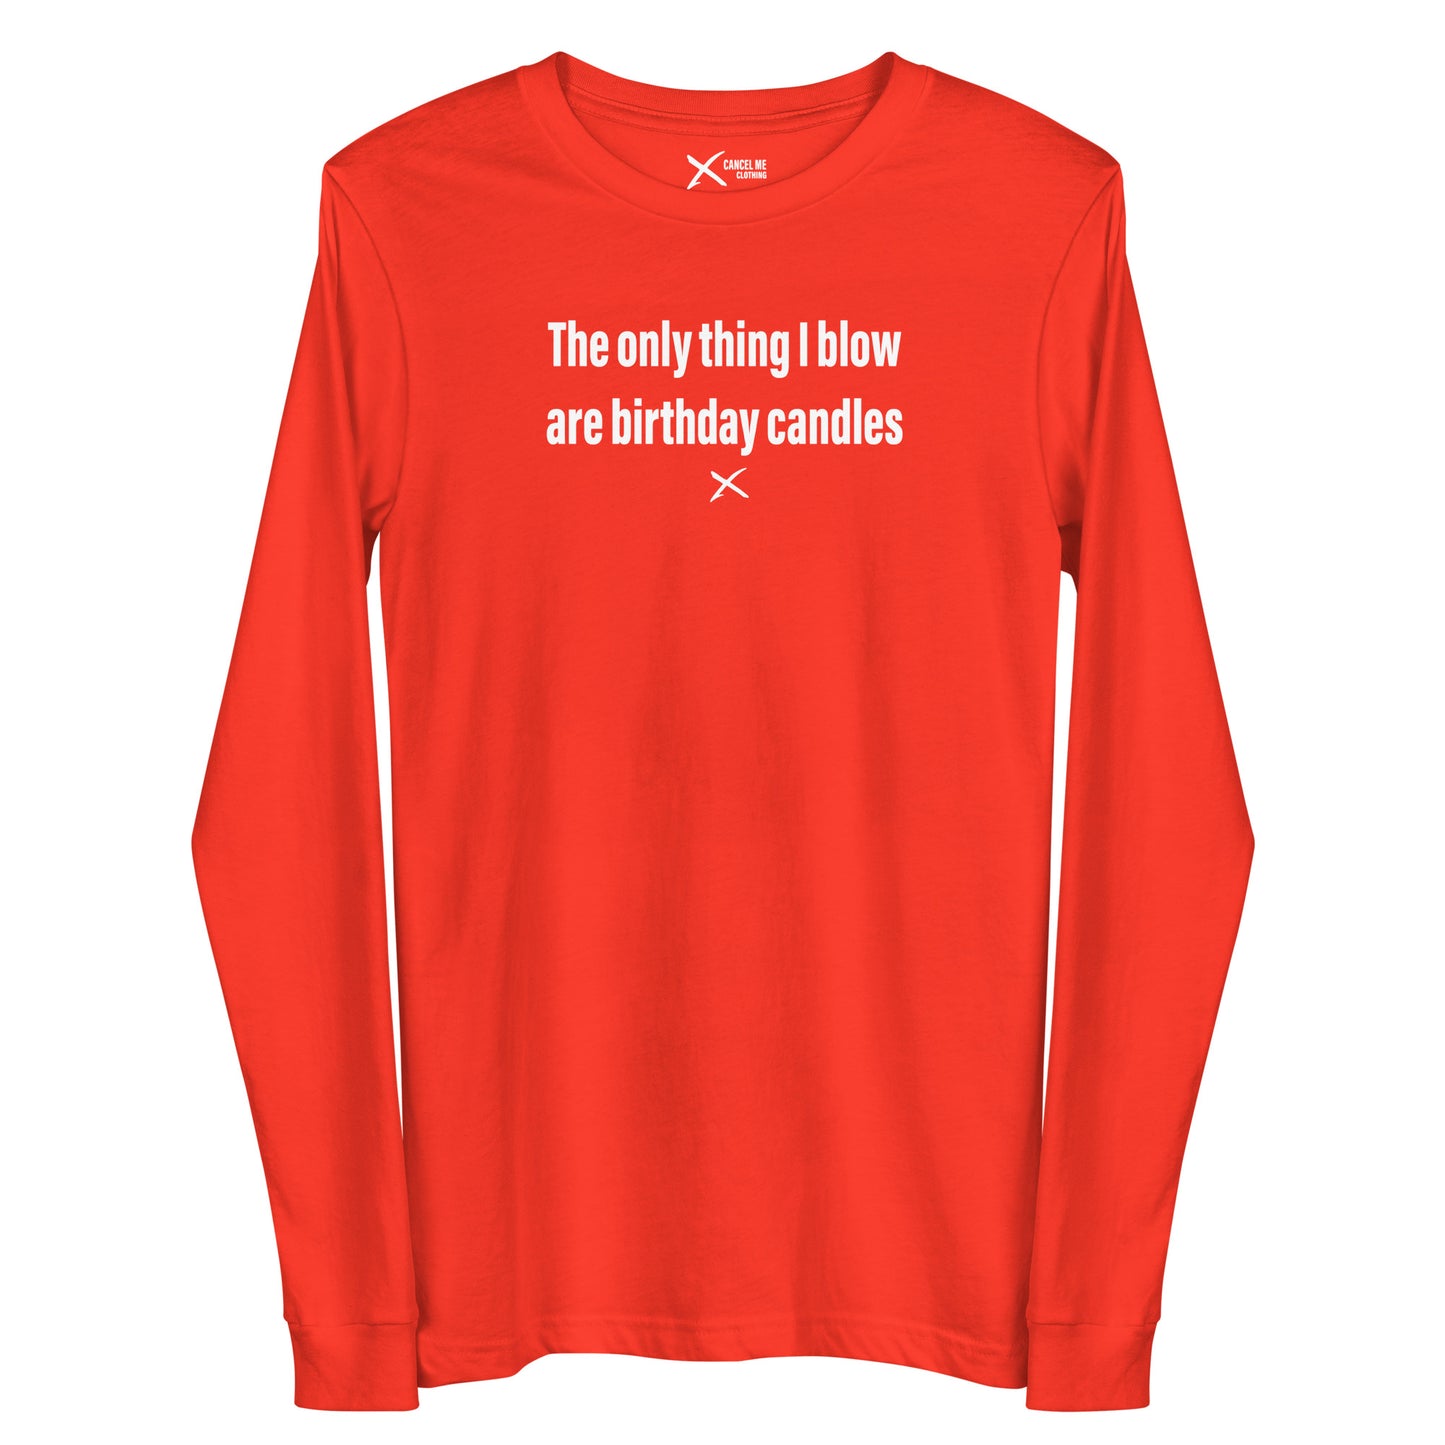 The only thing I blow are birthday candles - Longsleeve